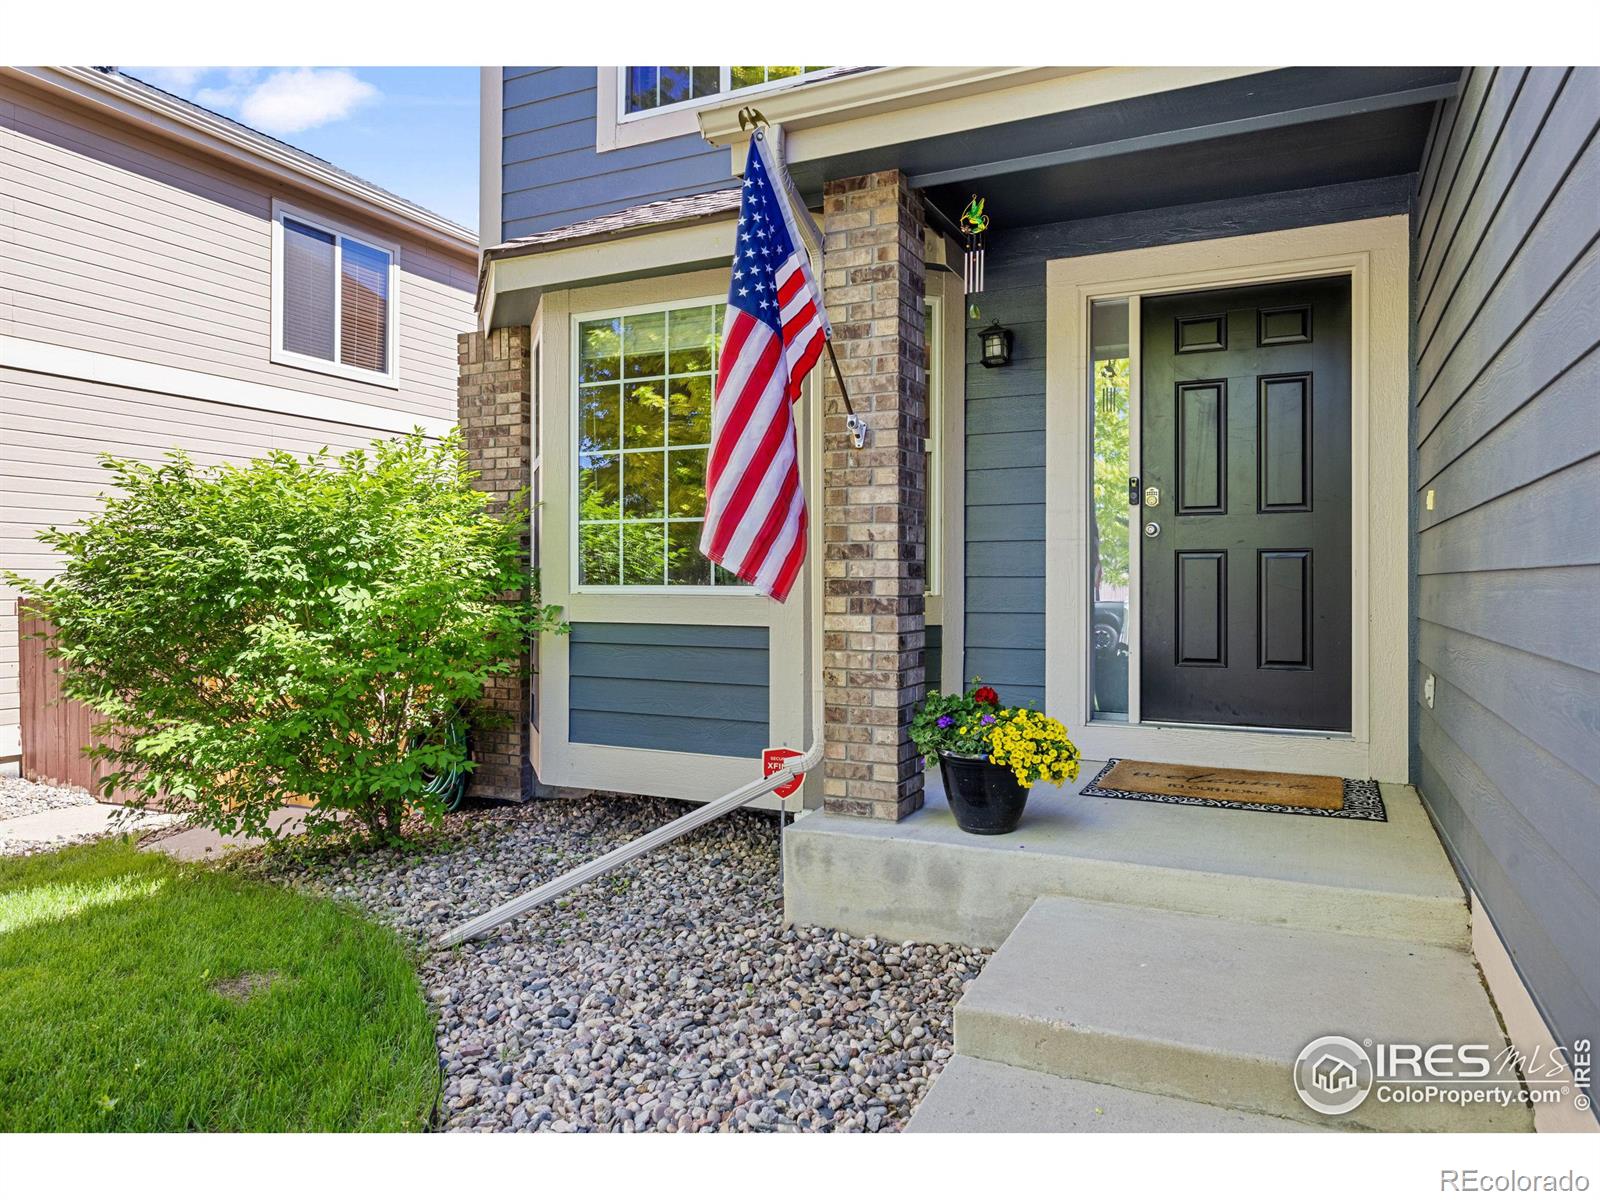 Report Image for 1415  Reeves Drive,Fort Collins, Colorado